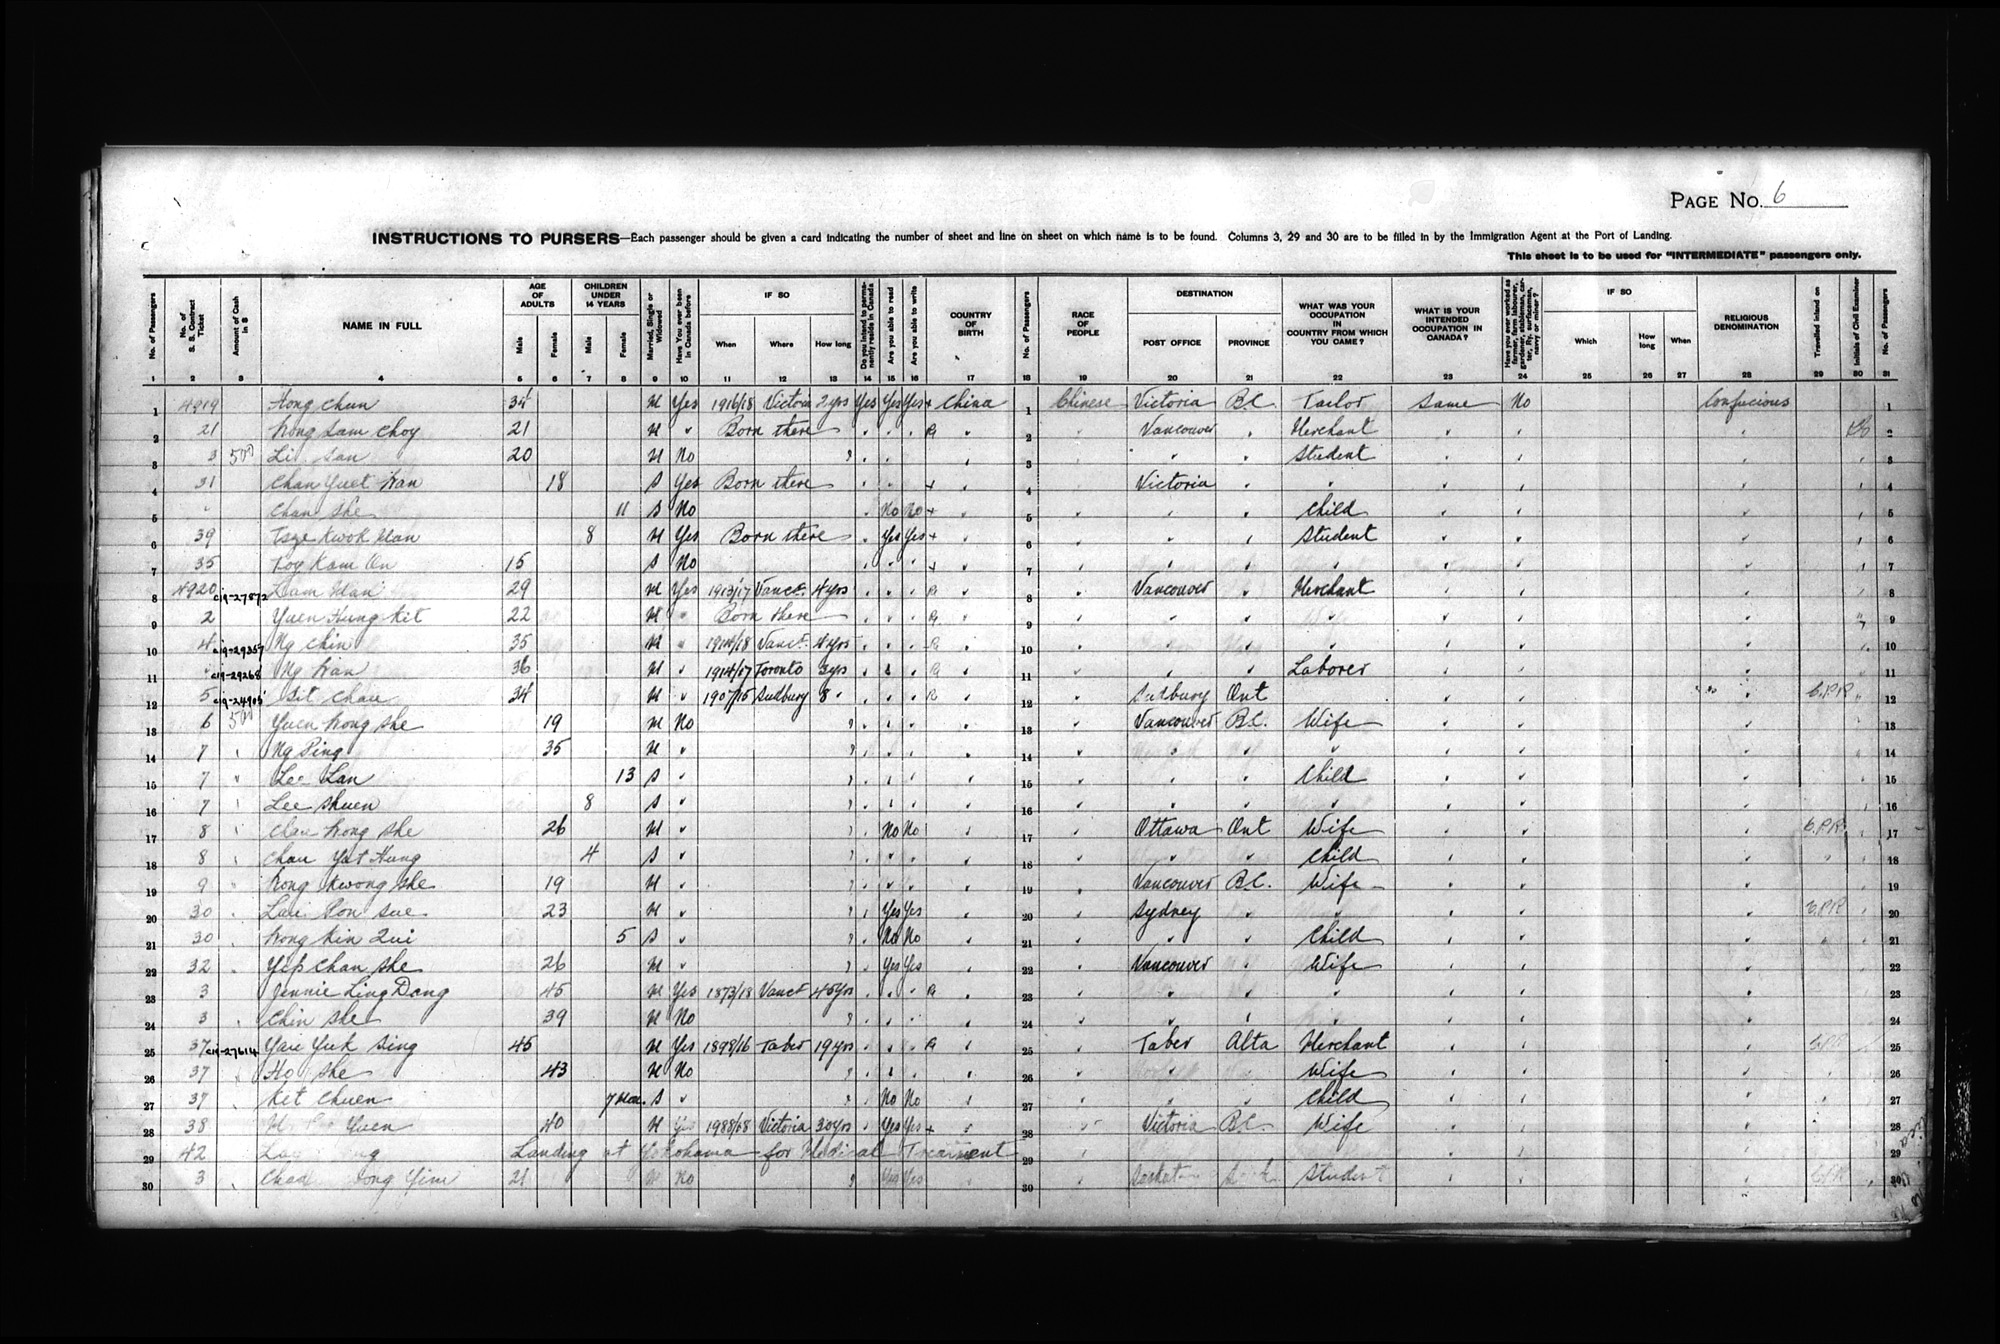 Digitized page of Passenger Lists for Image No.: CANIMM1913PLIST_0000408296-00255